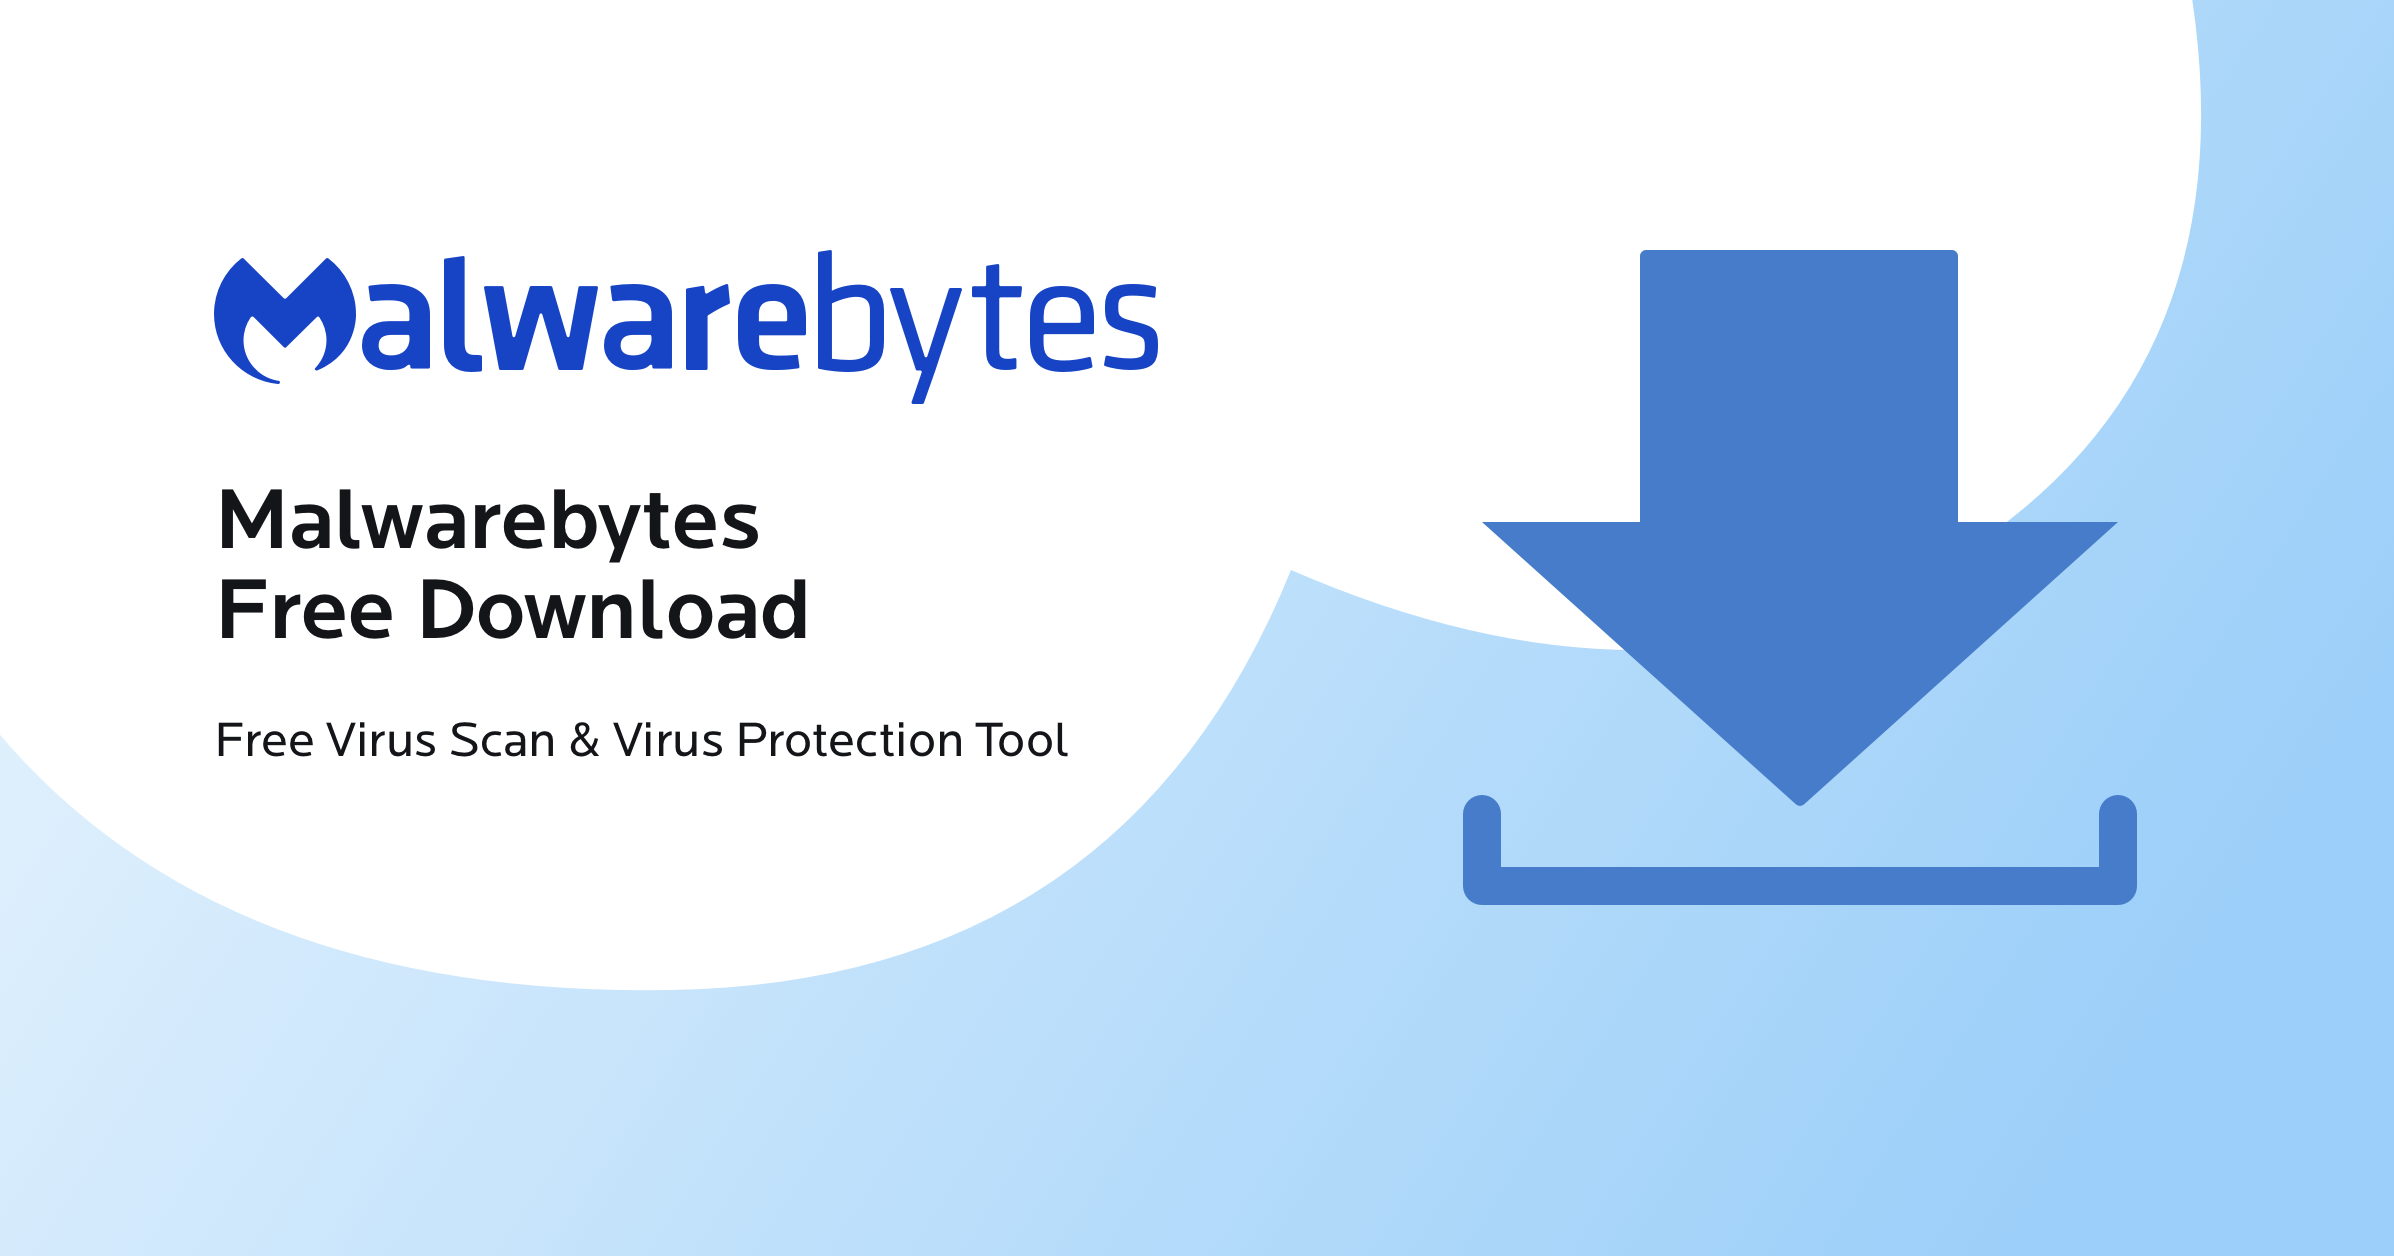 Antivirus software: Use a reliable antivirus program such as Avast, Norton, or Bitdefender to scan and remove the bom mau tran thu.exe file.
Malwarebytes: Malwarebytes is a powerful anti-malware tool that can detect and eliminate the bom mau tran thu.exe malware.